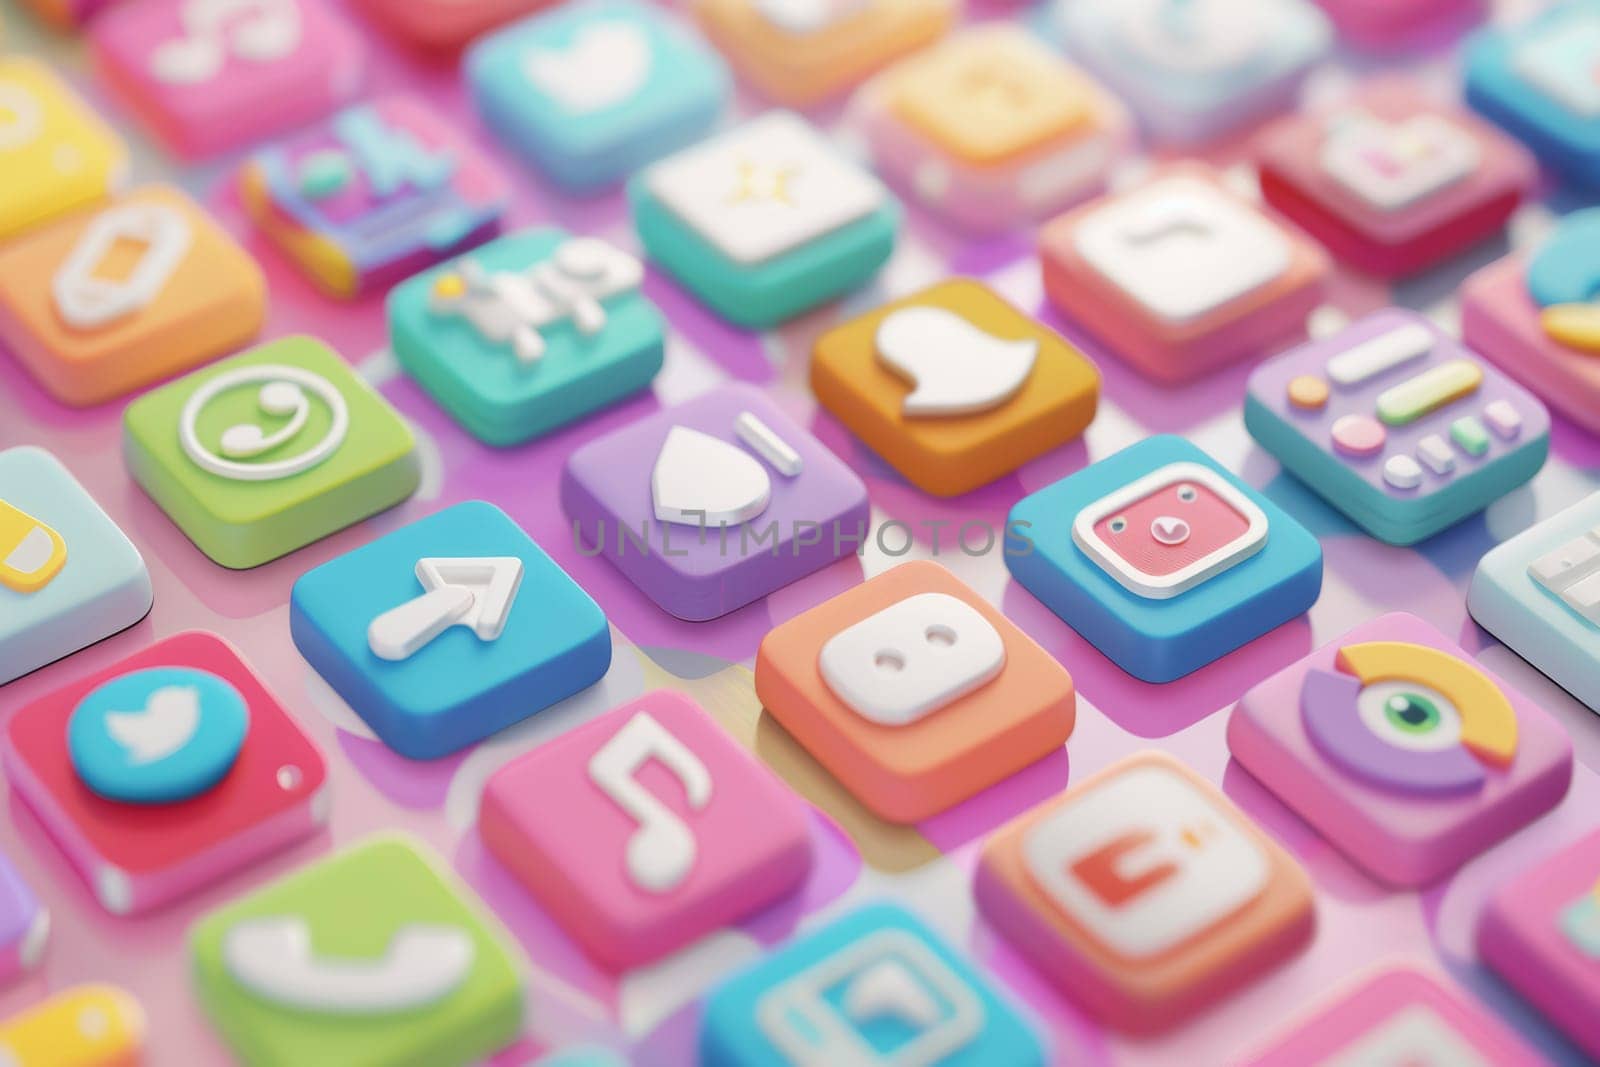 A close-up of a screen showcases a kaleidoscope of colorful social media icons, symbolizing digital connectivity and online interaction. The array of apps denotes modern communication